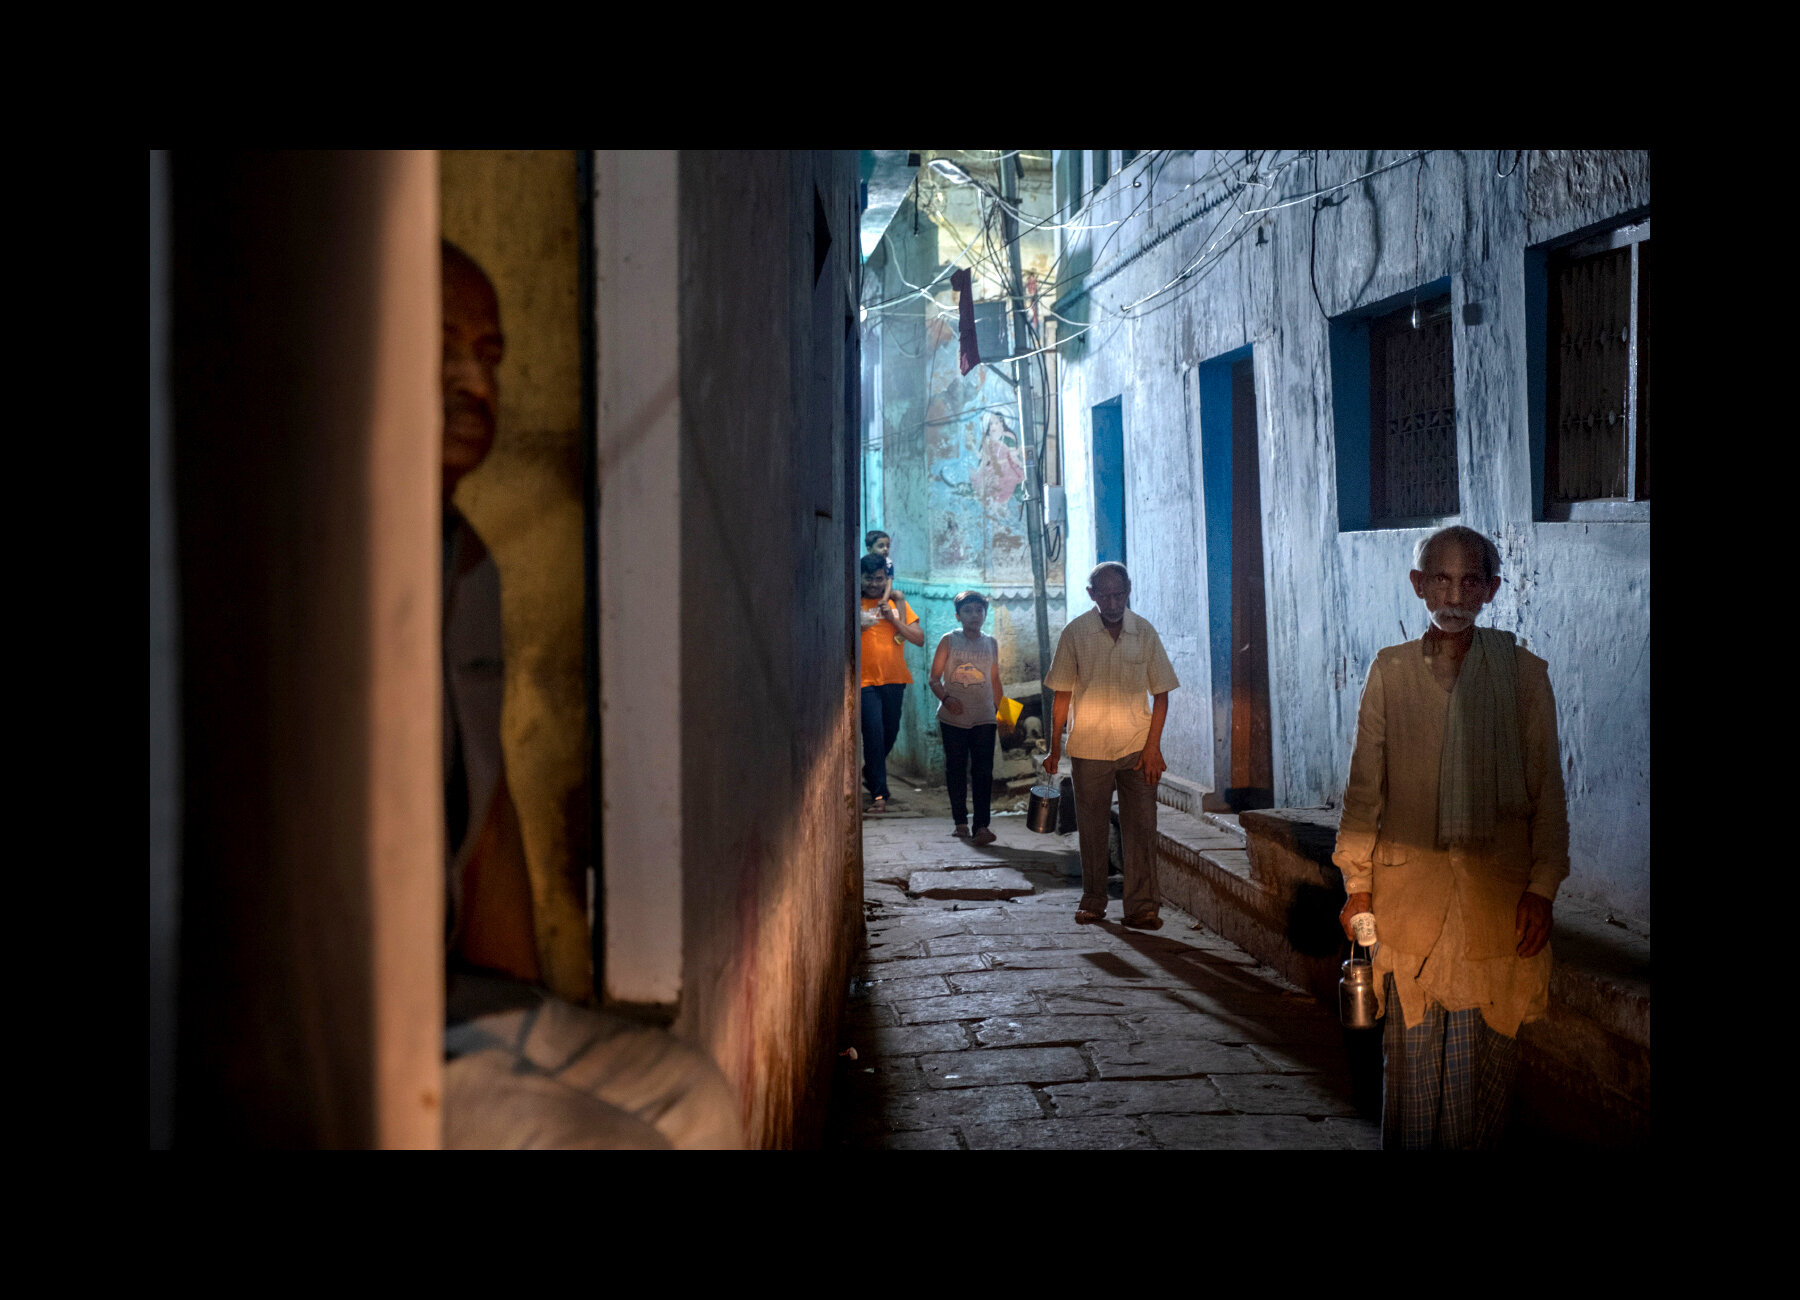  Locals walk home after a day of work in the old city of Varanasi, India. 2019 